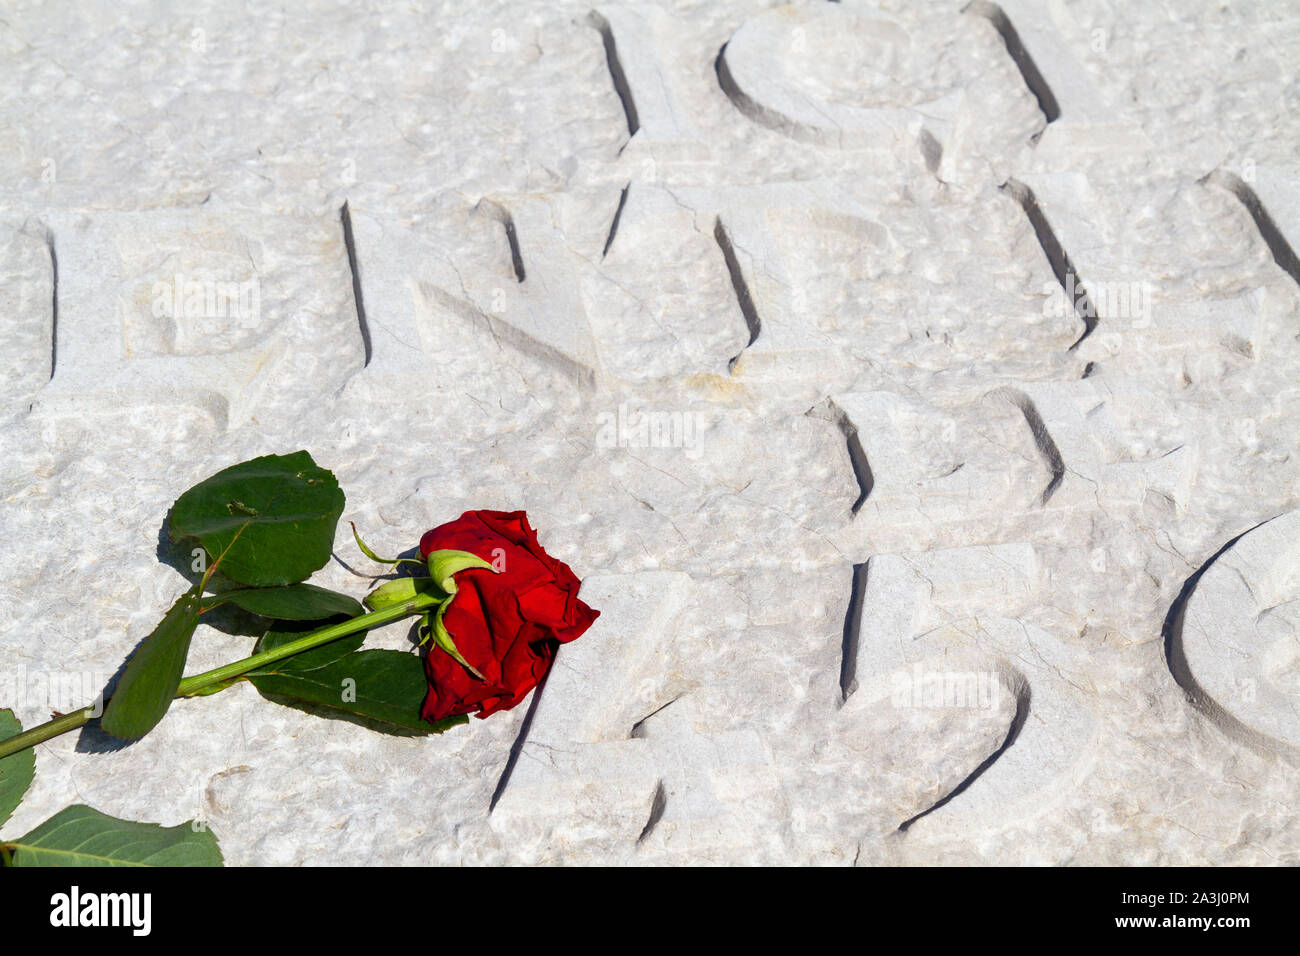 A rose placed on the graves of soldiers fallen in WW I. Necropolis of Notre-Dame-de-Lorette, memorial of the WW I (1914-1918). Stock Photo